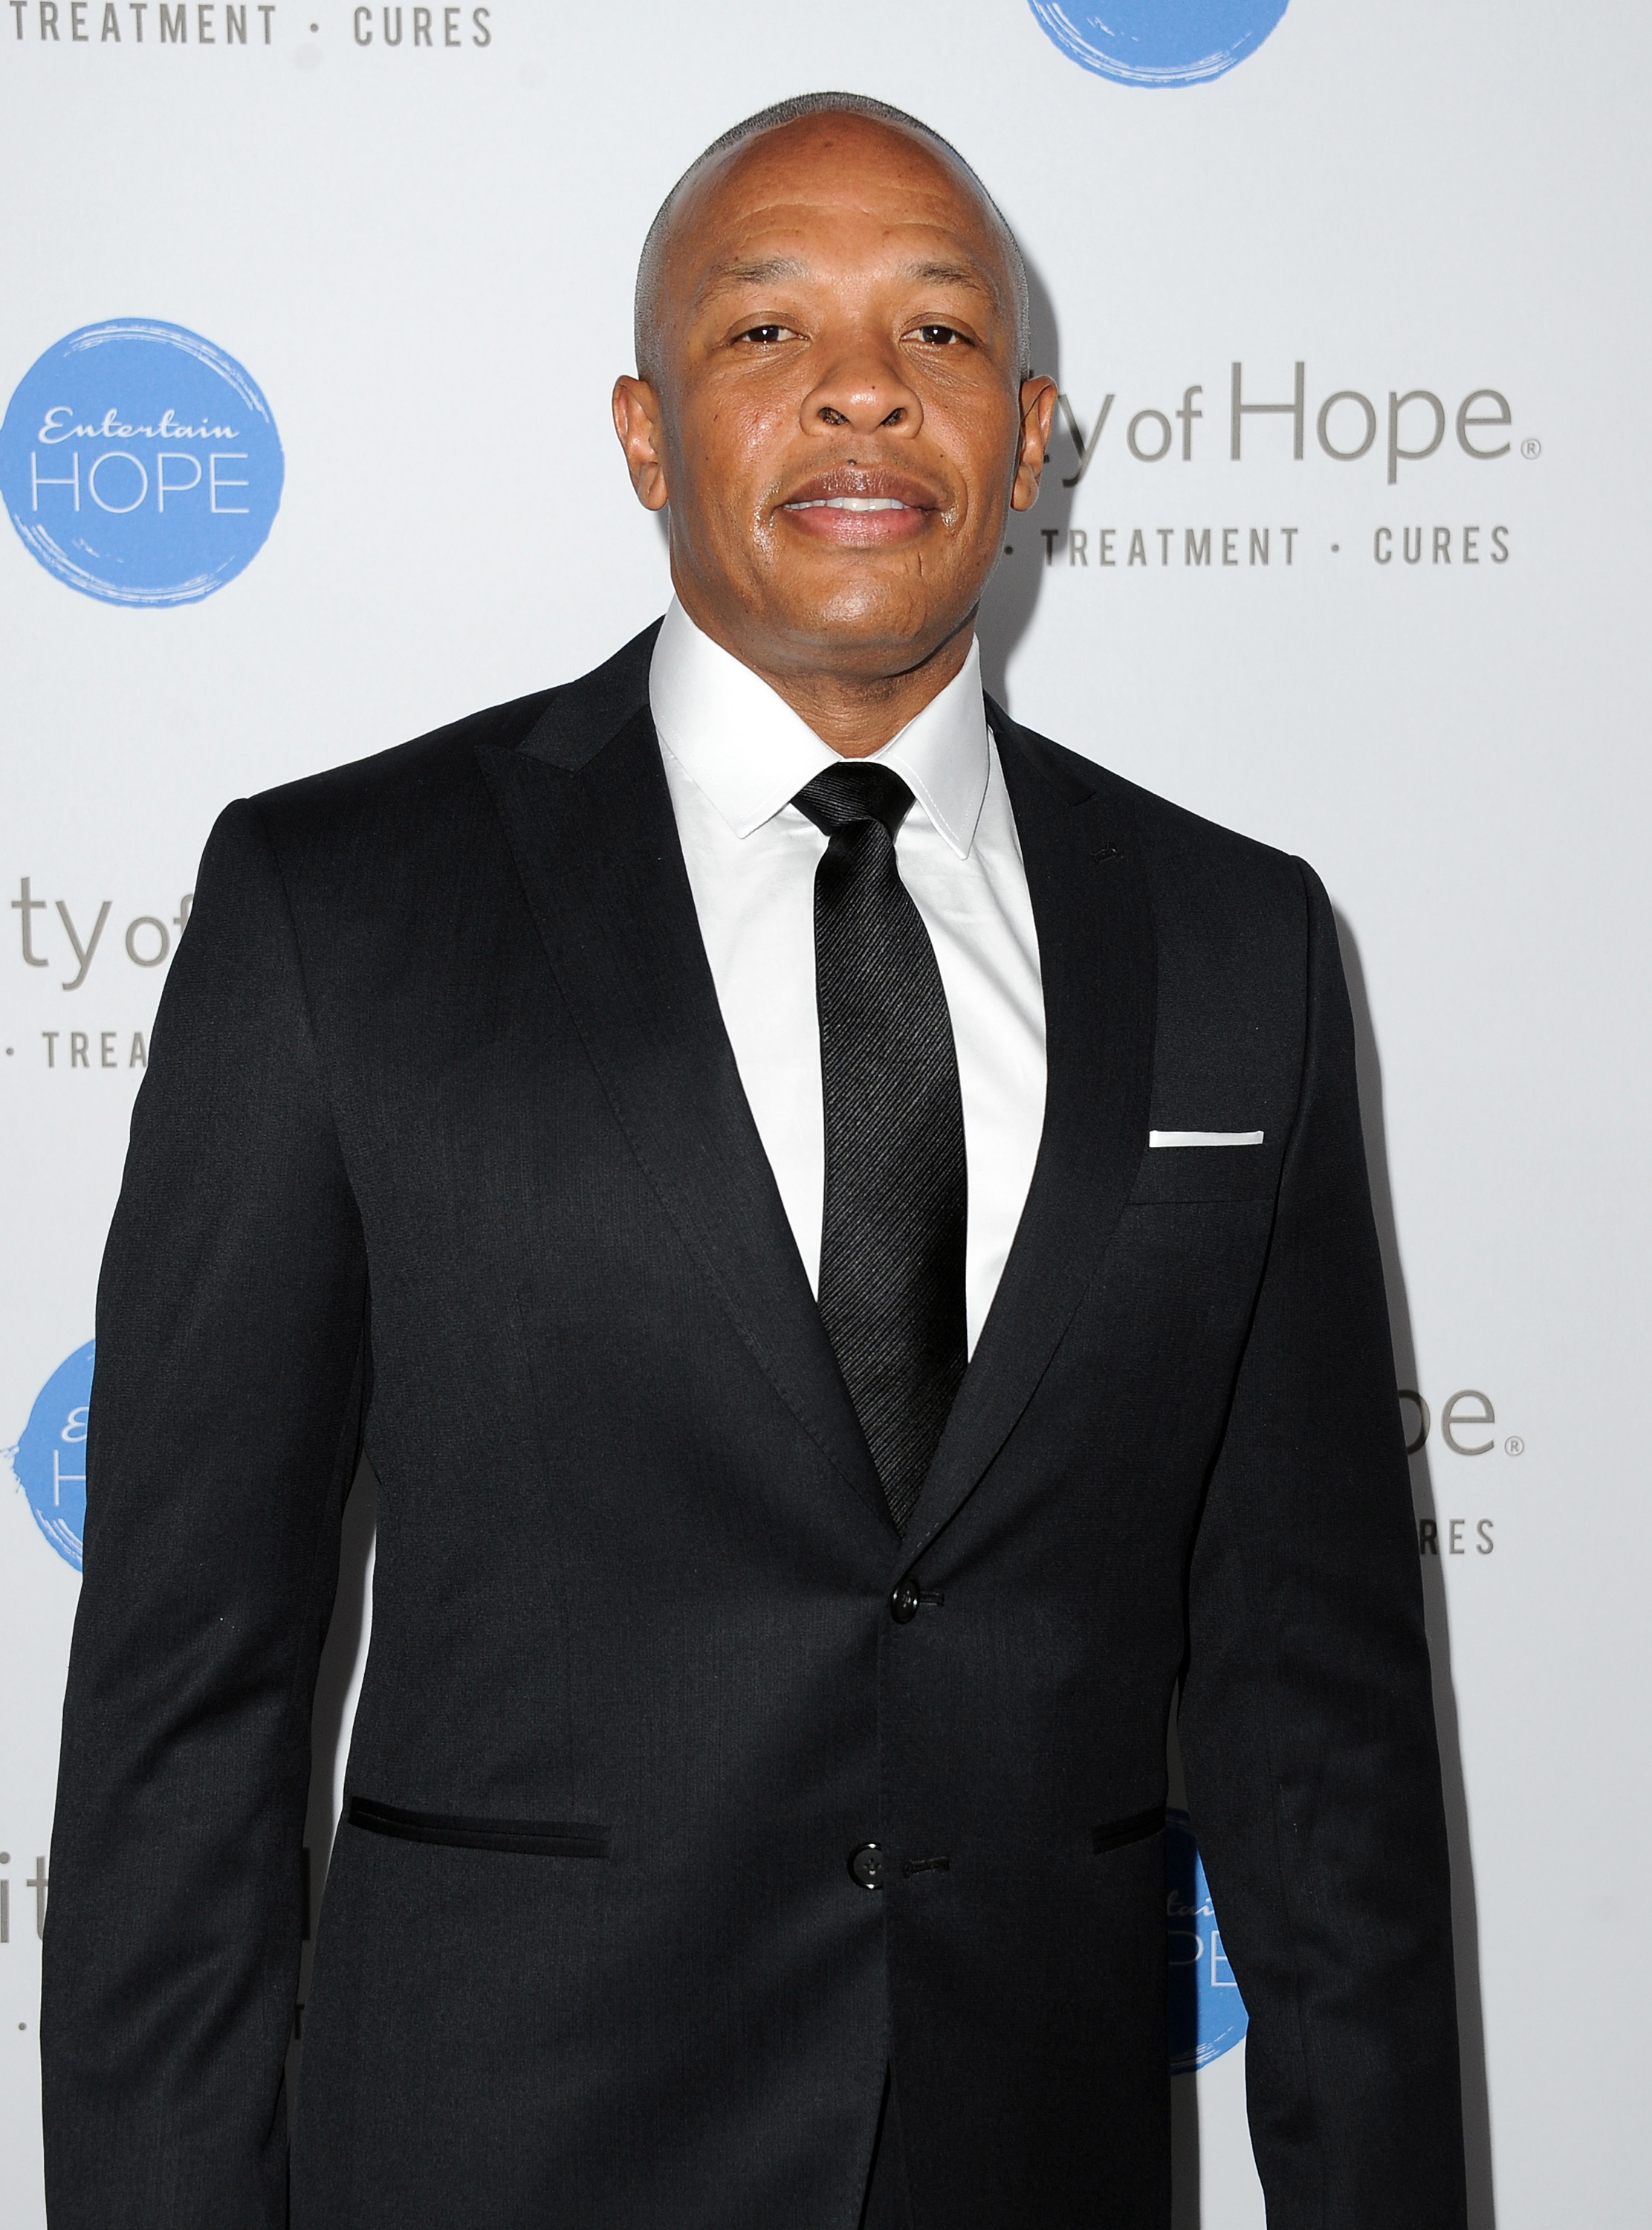 Dr. Dre Net Worth 5 Fast Facts You Need to Know